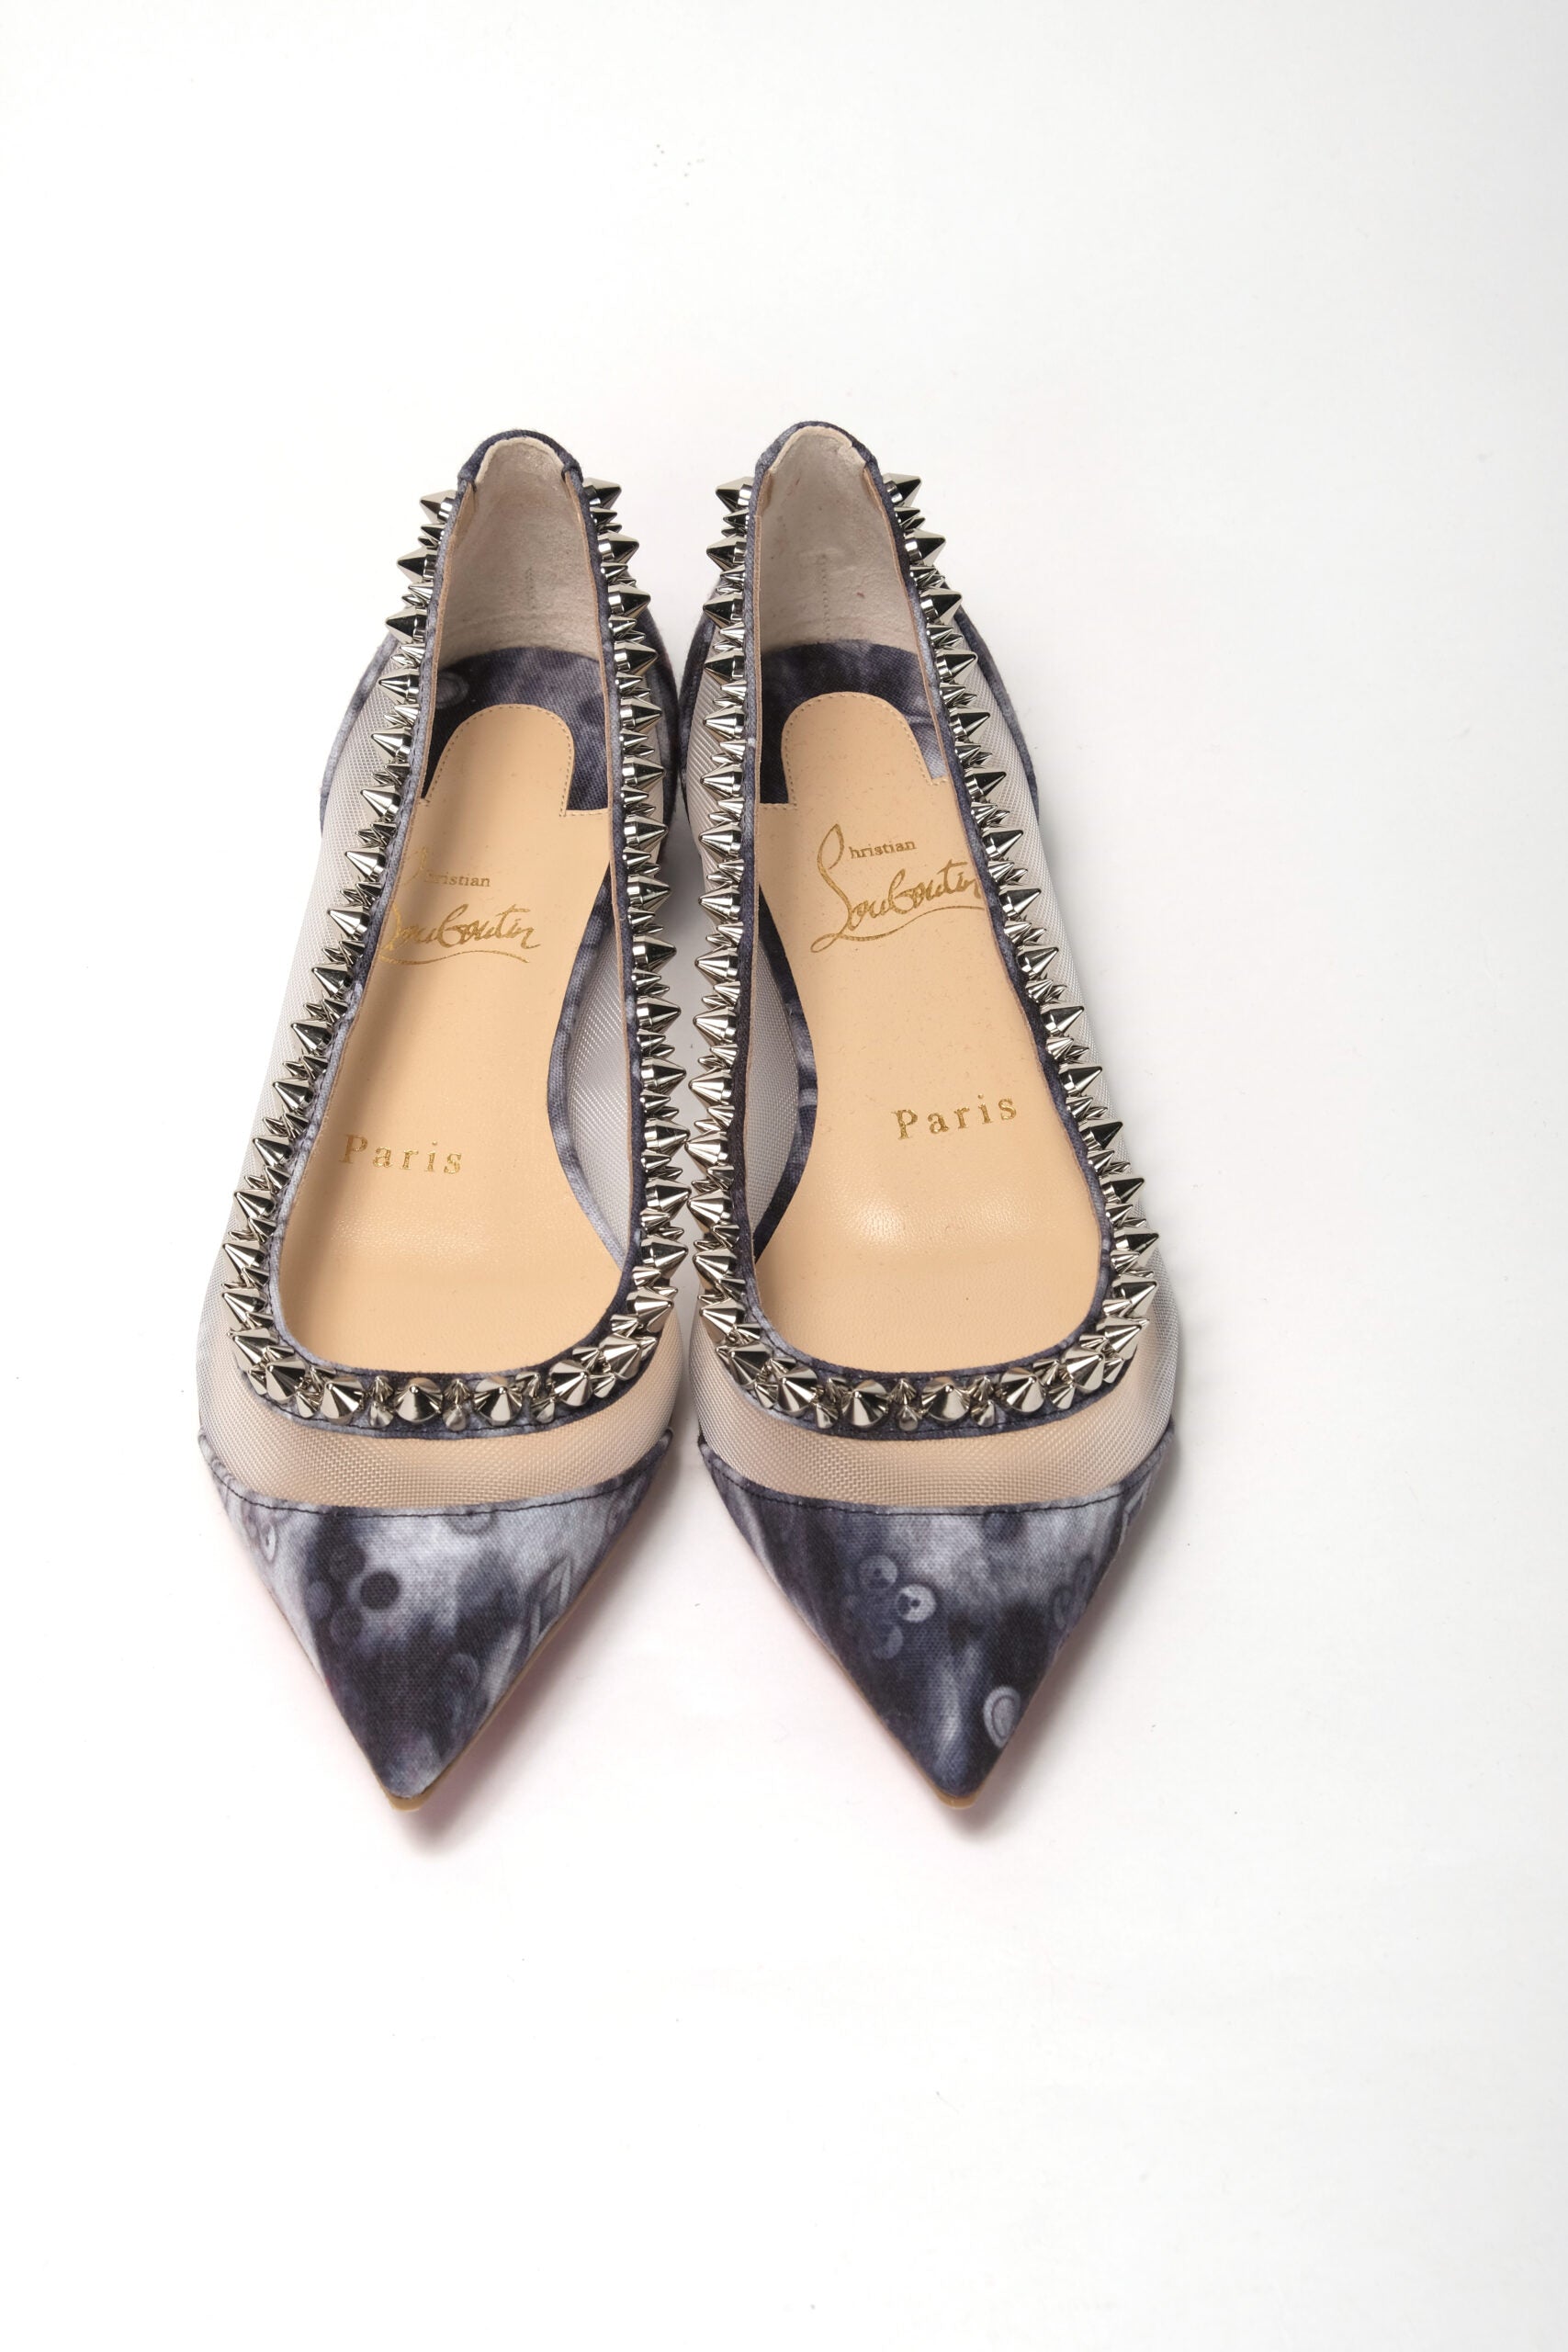 Christian Louboutin Multicolor Print Silver Flat Point Toe Shoe - Designed by Christian Louboutin Available to Buy at a Discounted Price on Moon Behind The Hill Online Designer Discount Store